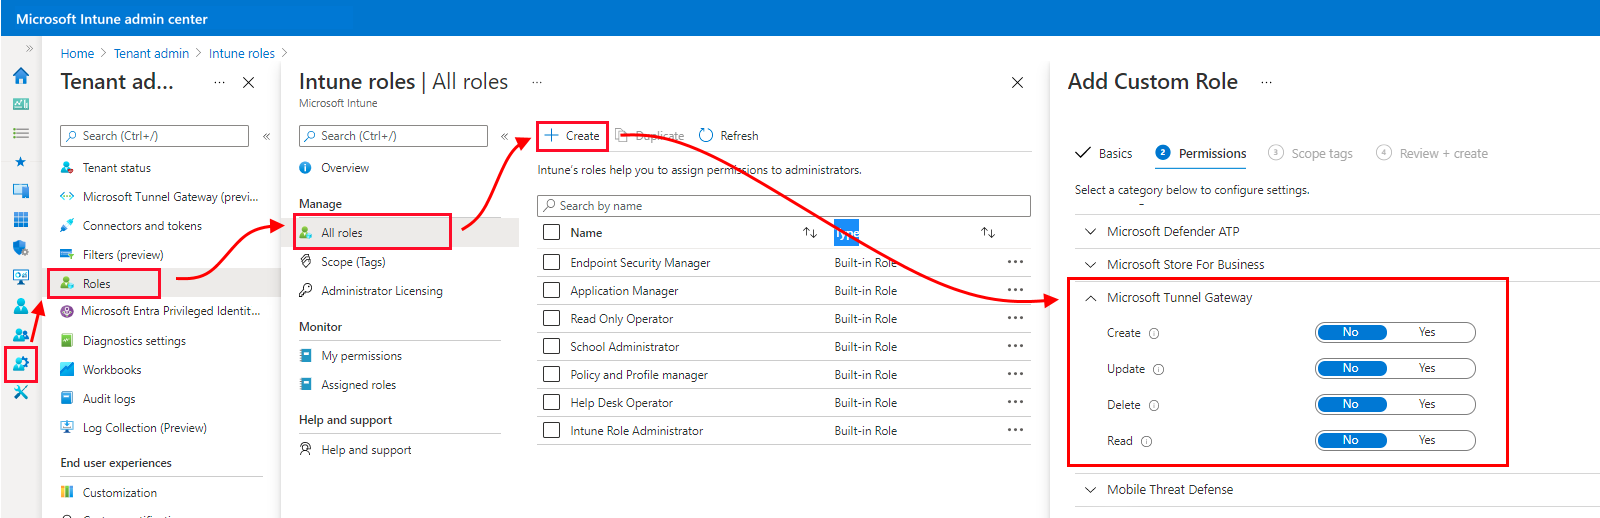 Screen shot of the tunnel gateway permissions in the Microsoft Intune admin center.